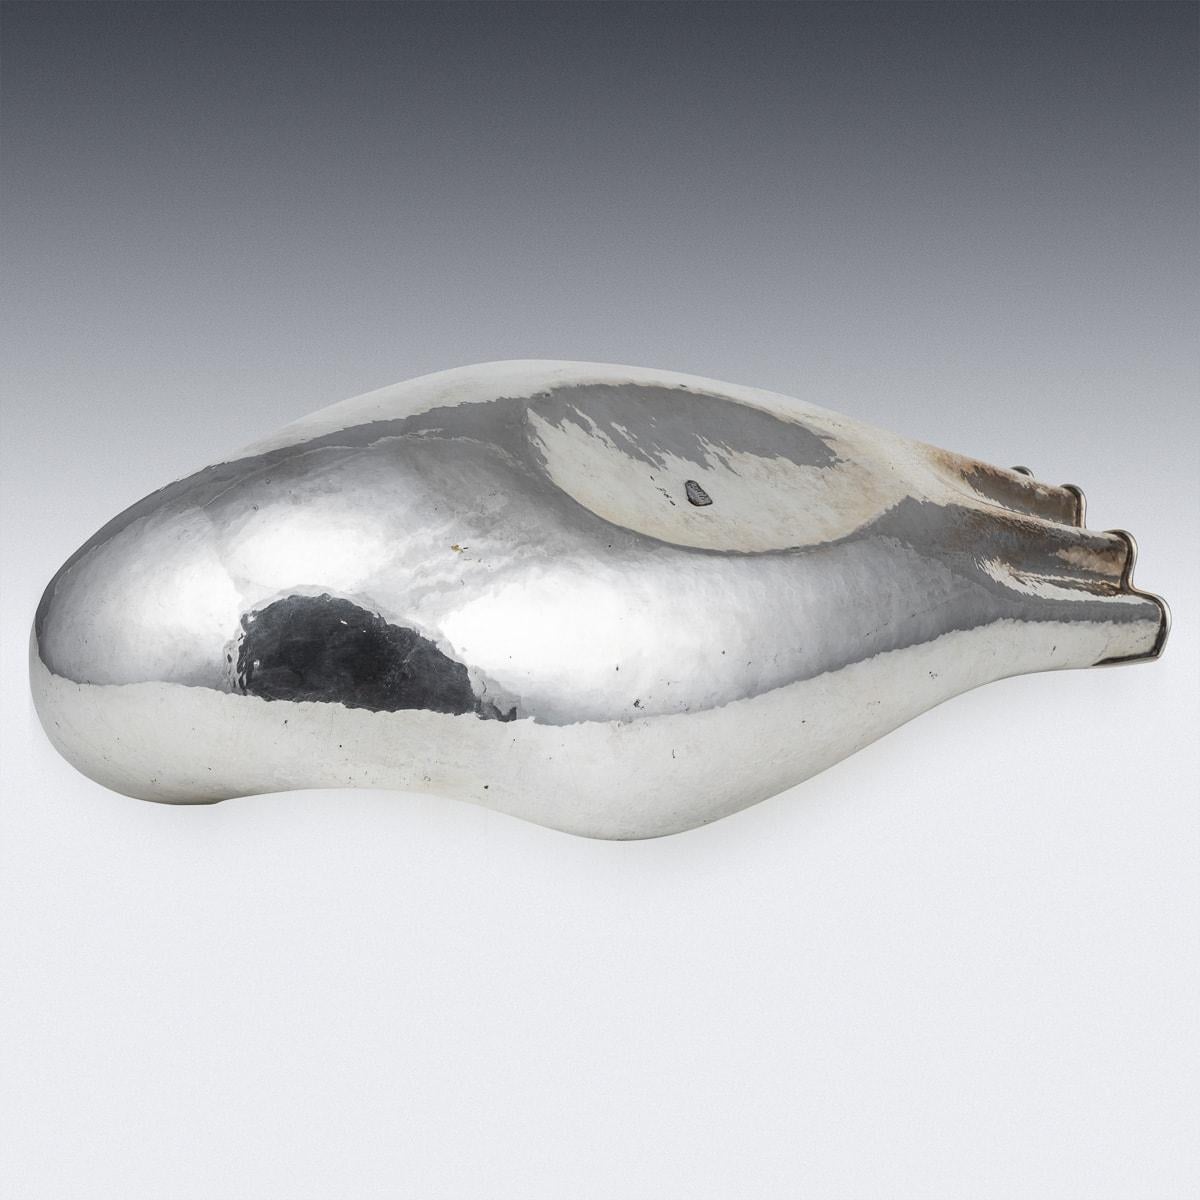 Italian Silver Baguette Tray In The Form Of A Swan, By Finzi c.1970 For Sale 3